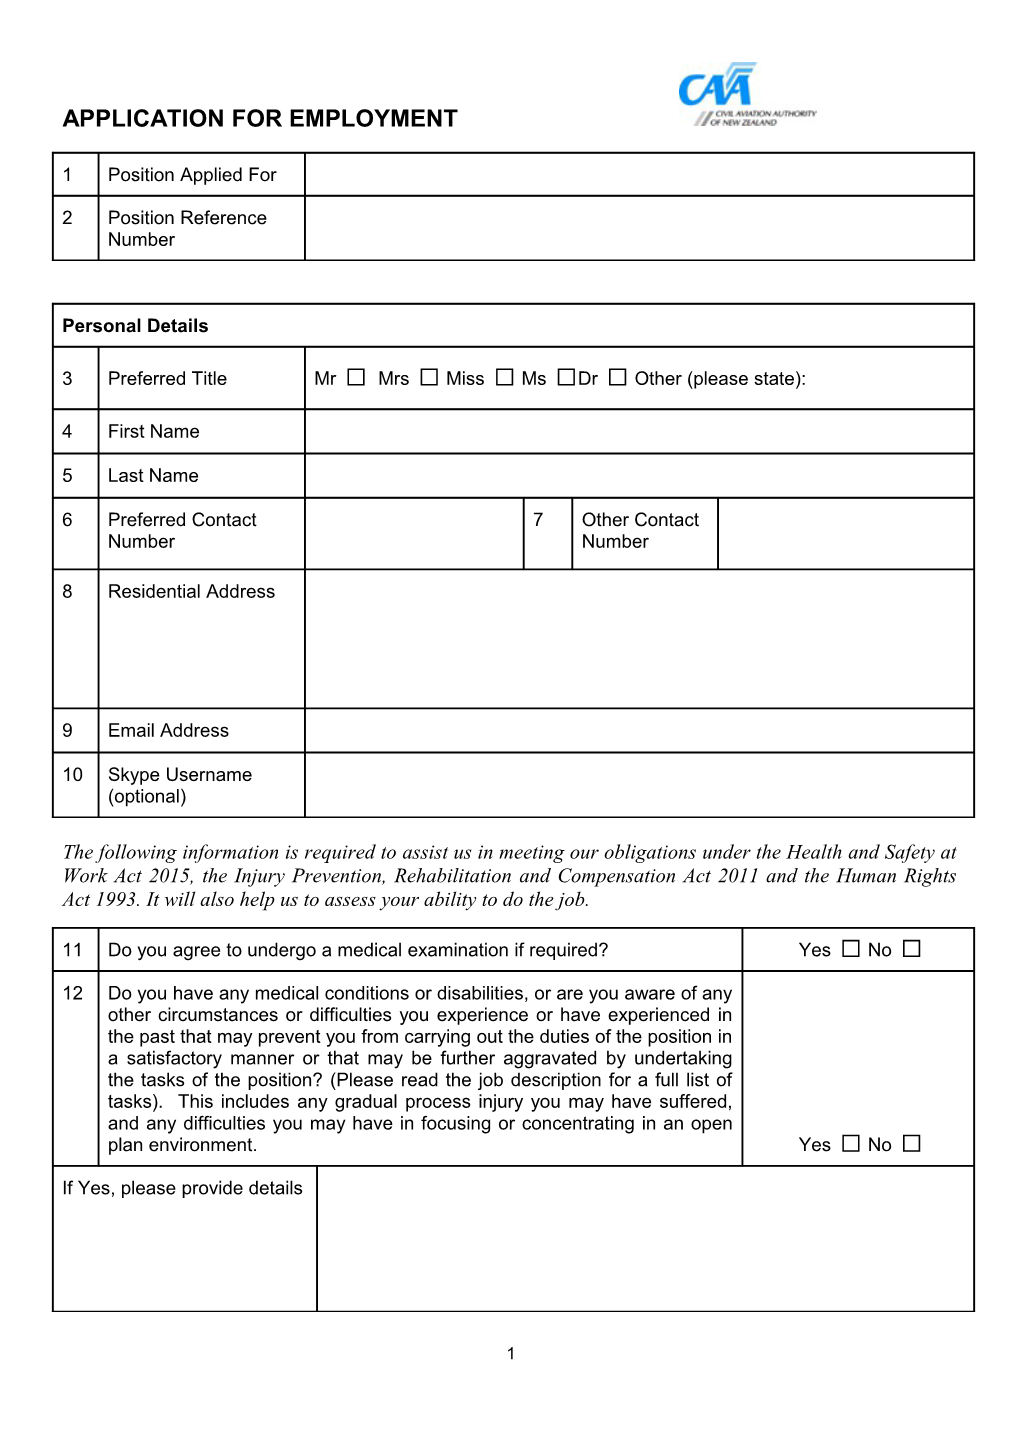 Application for Employment Form Current